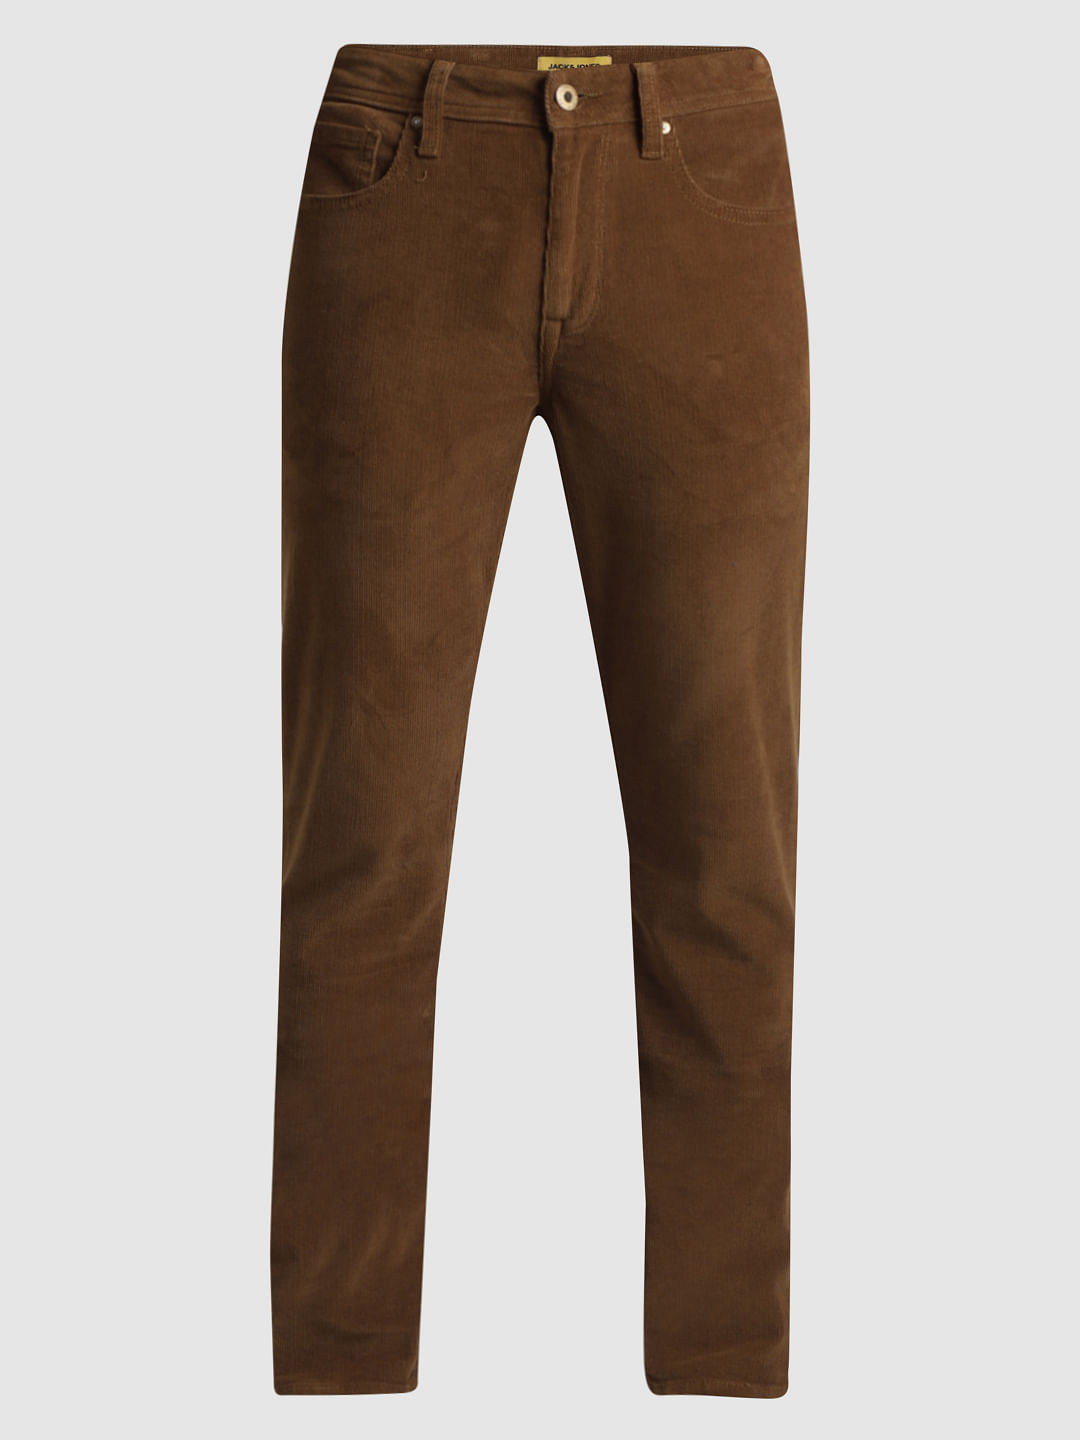 Beige corduroy Sirmione trousers - Made in Italy